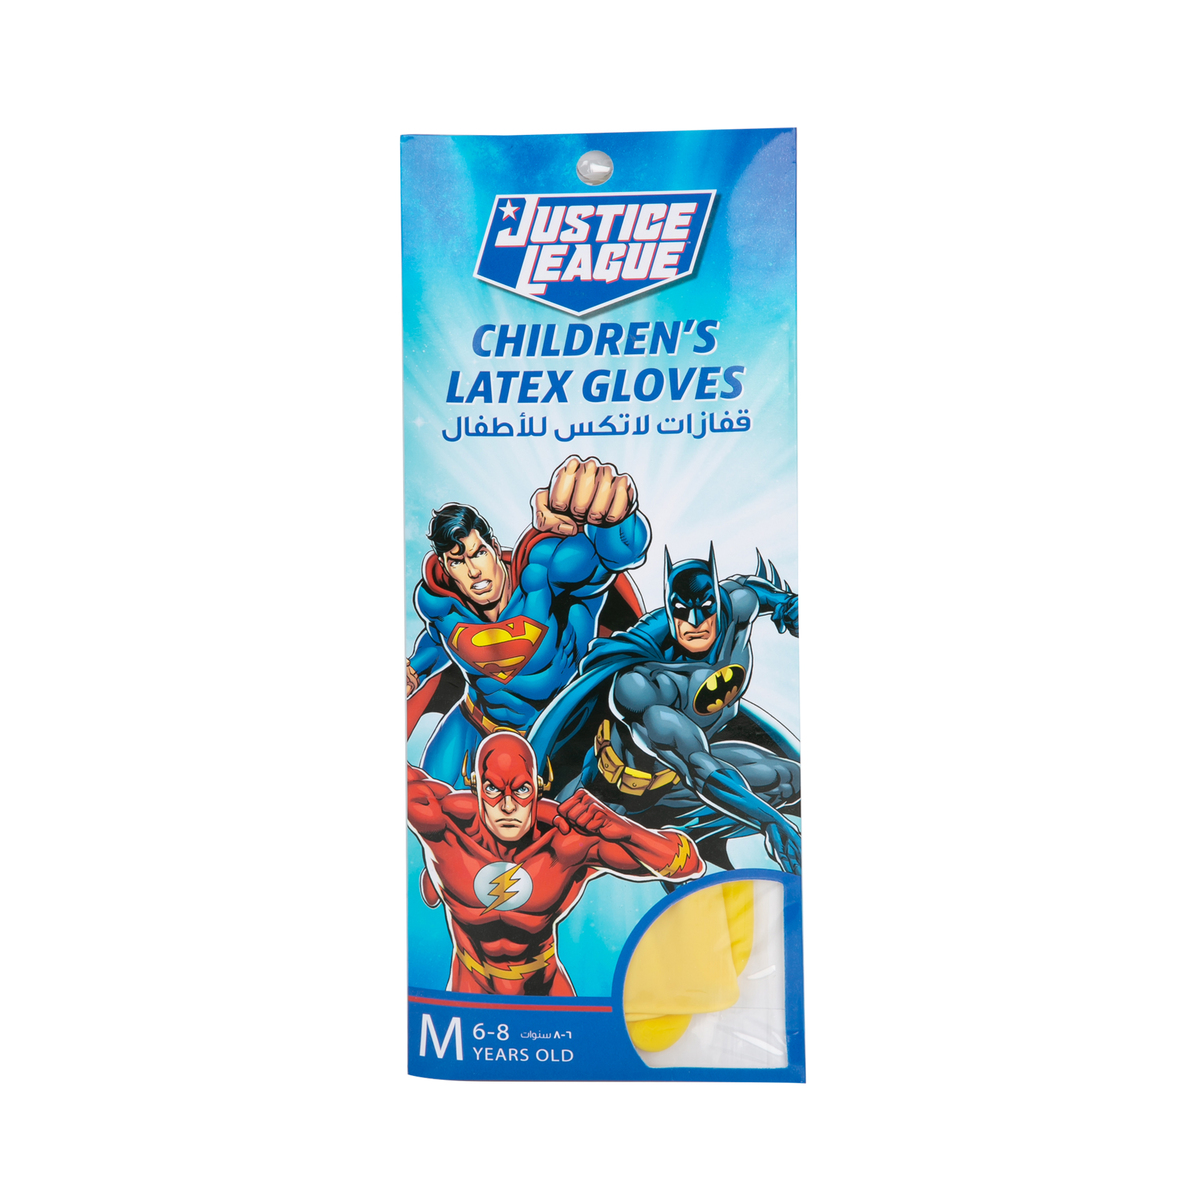 Justice League Children's Latex Gloves Size Medium For 6-8 Years Old 1 Pair